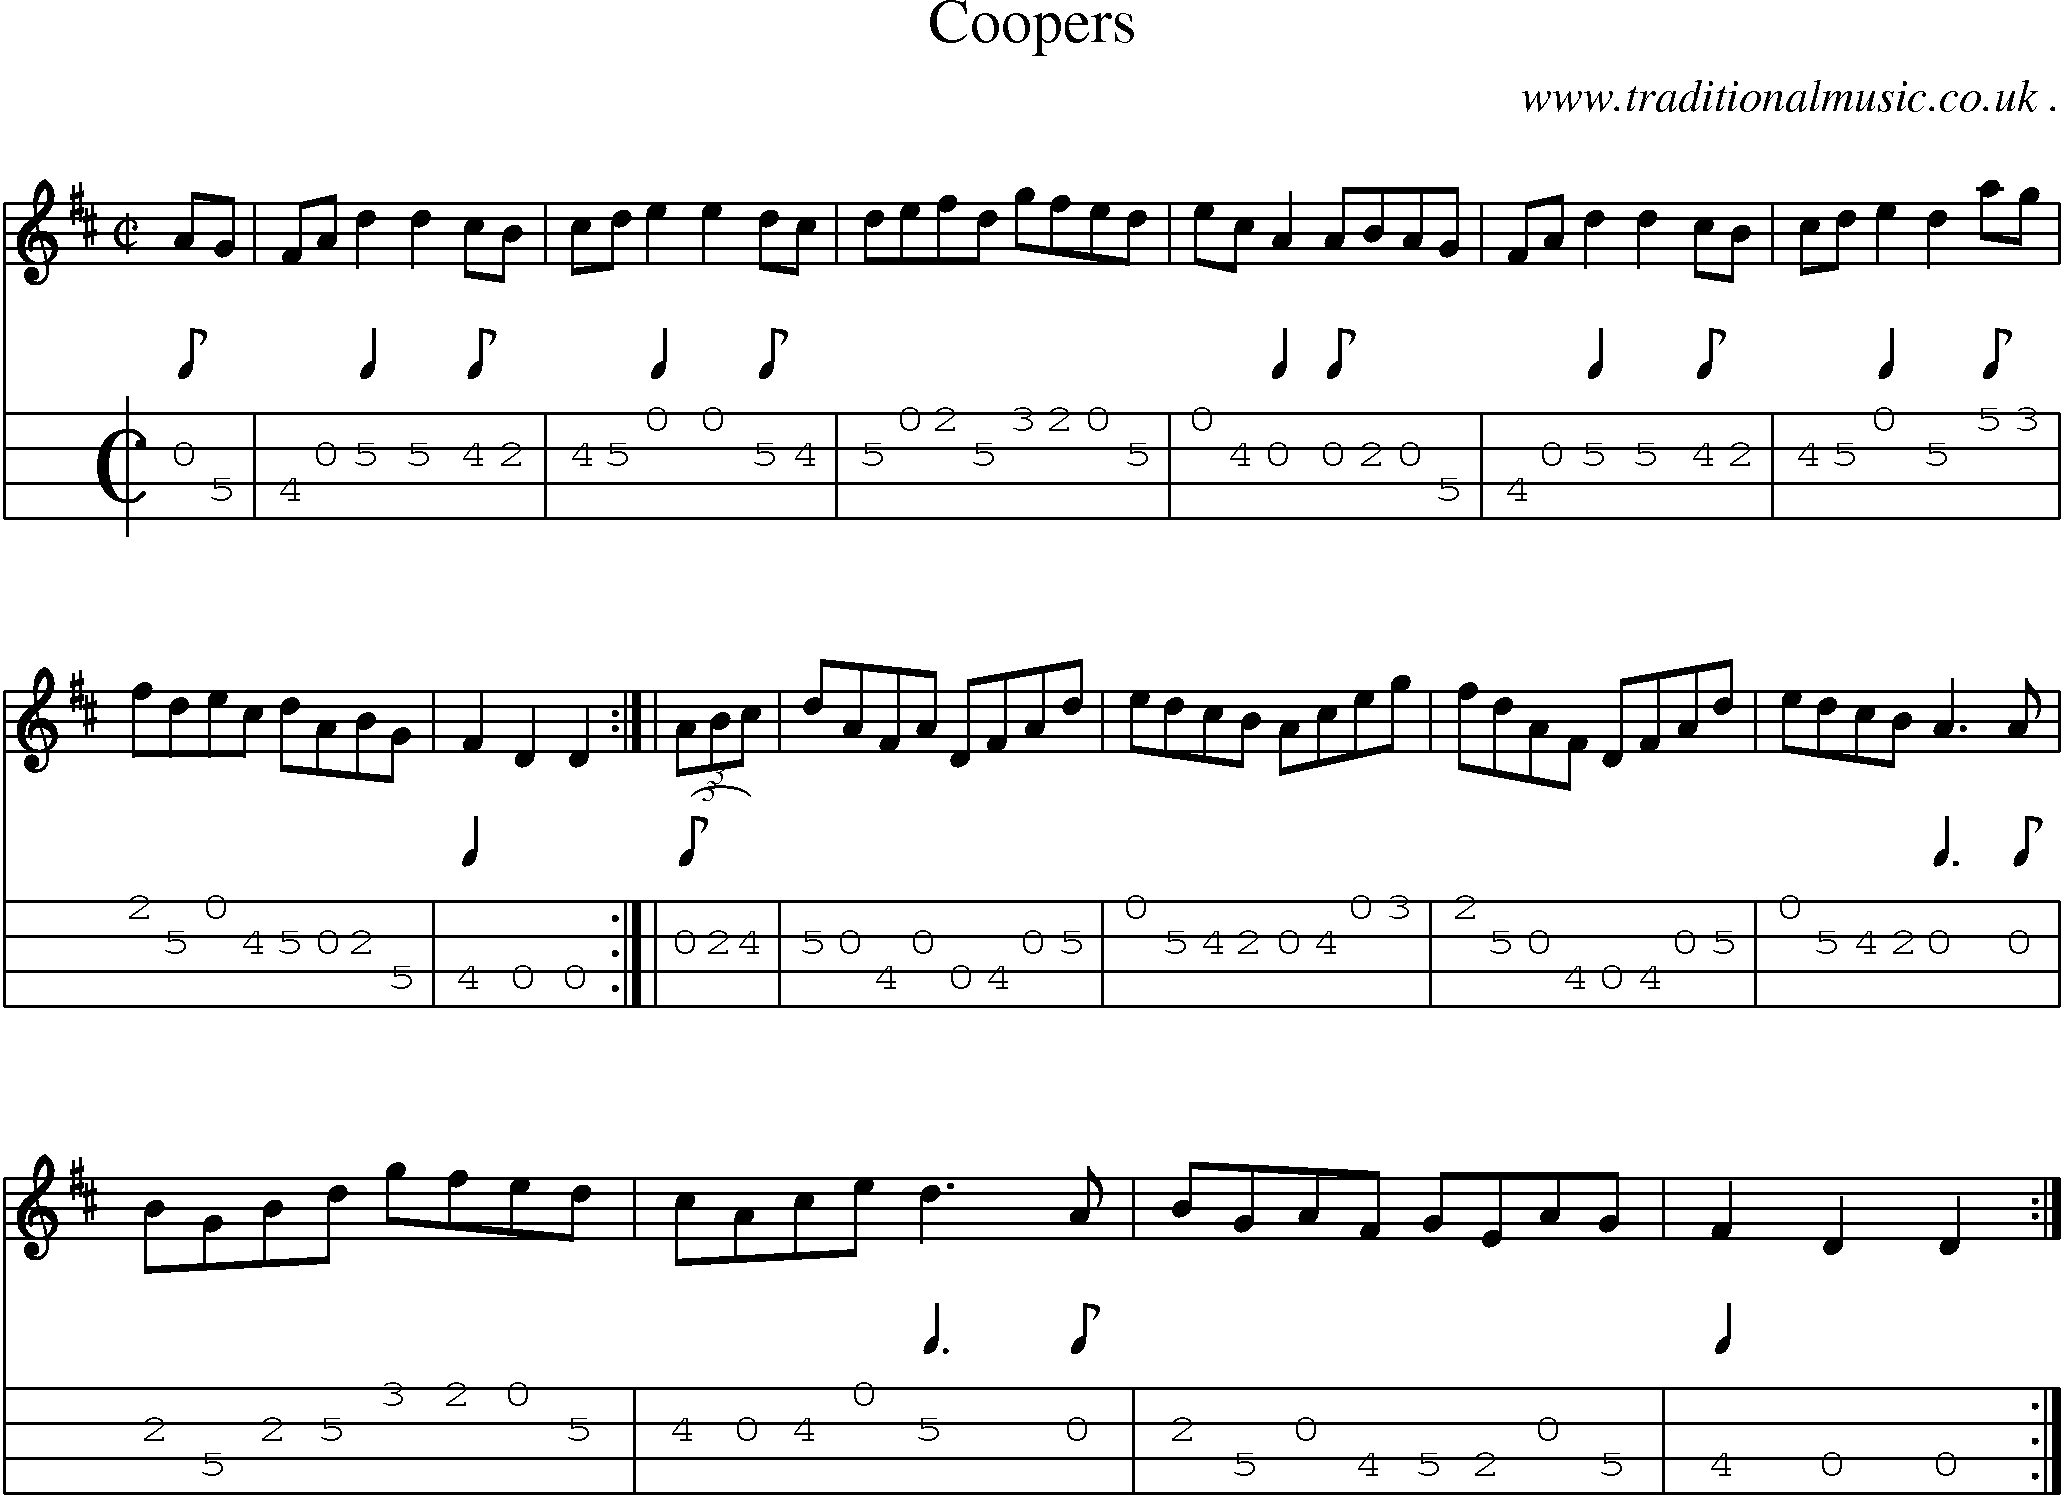 Sheet-music  score, Chords and Mandolin Tabs for Coopers